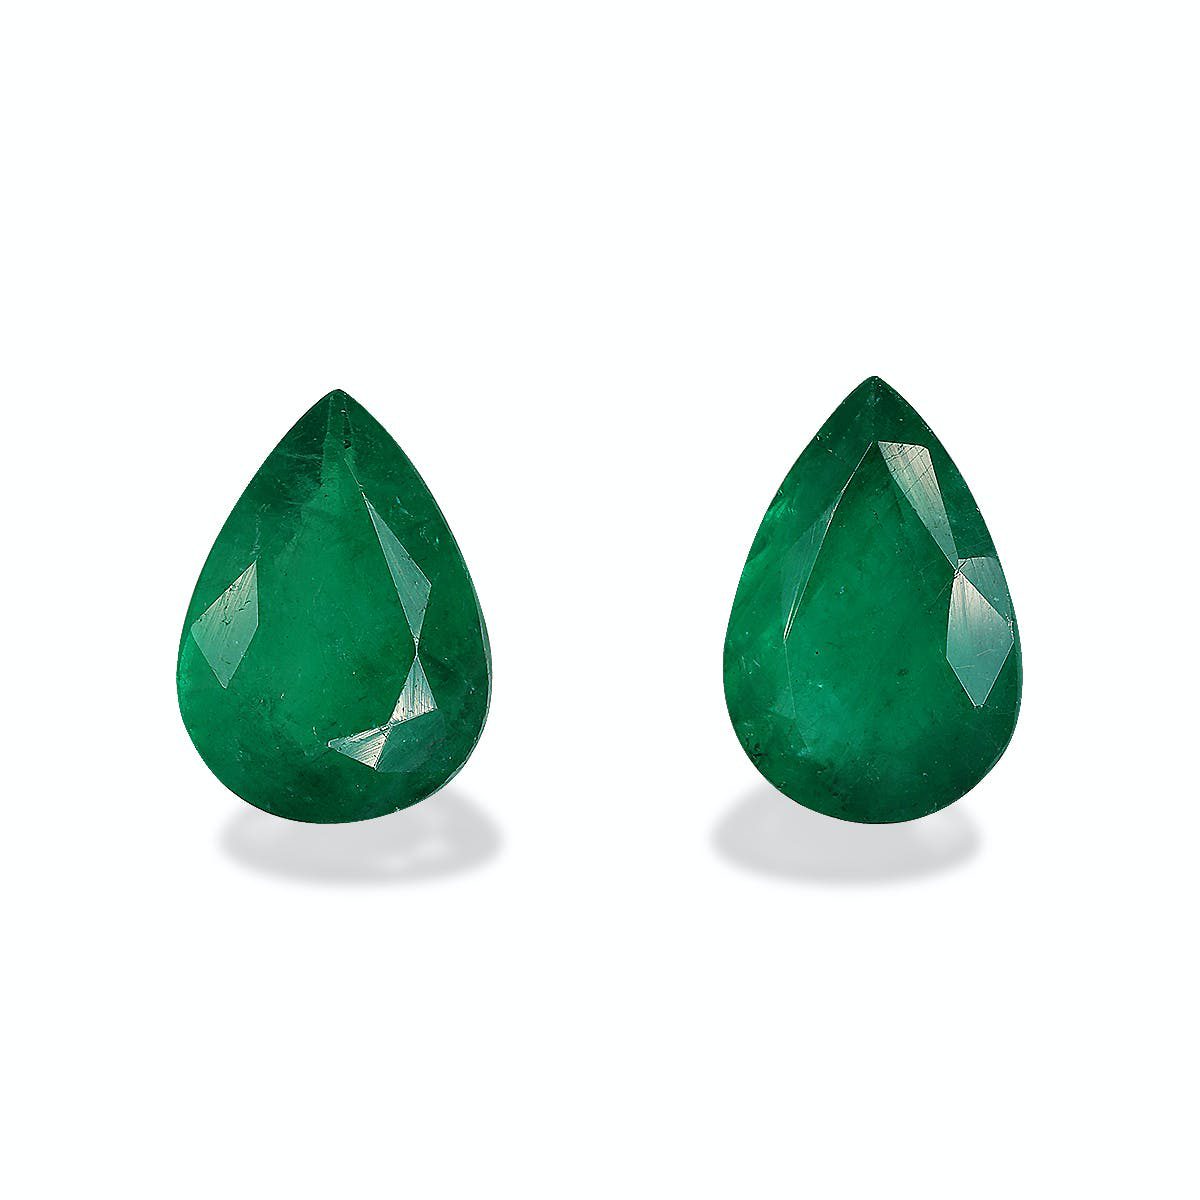 Picture of Green Zambian Emerald 5.86ct - Pair (PG0304)